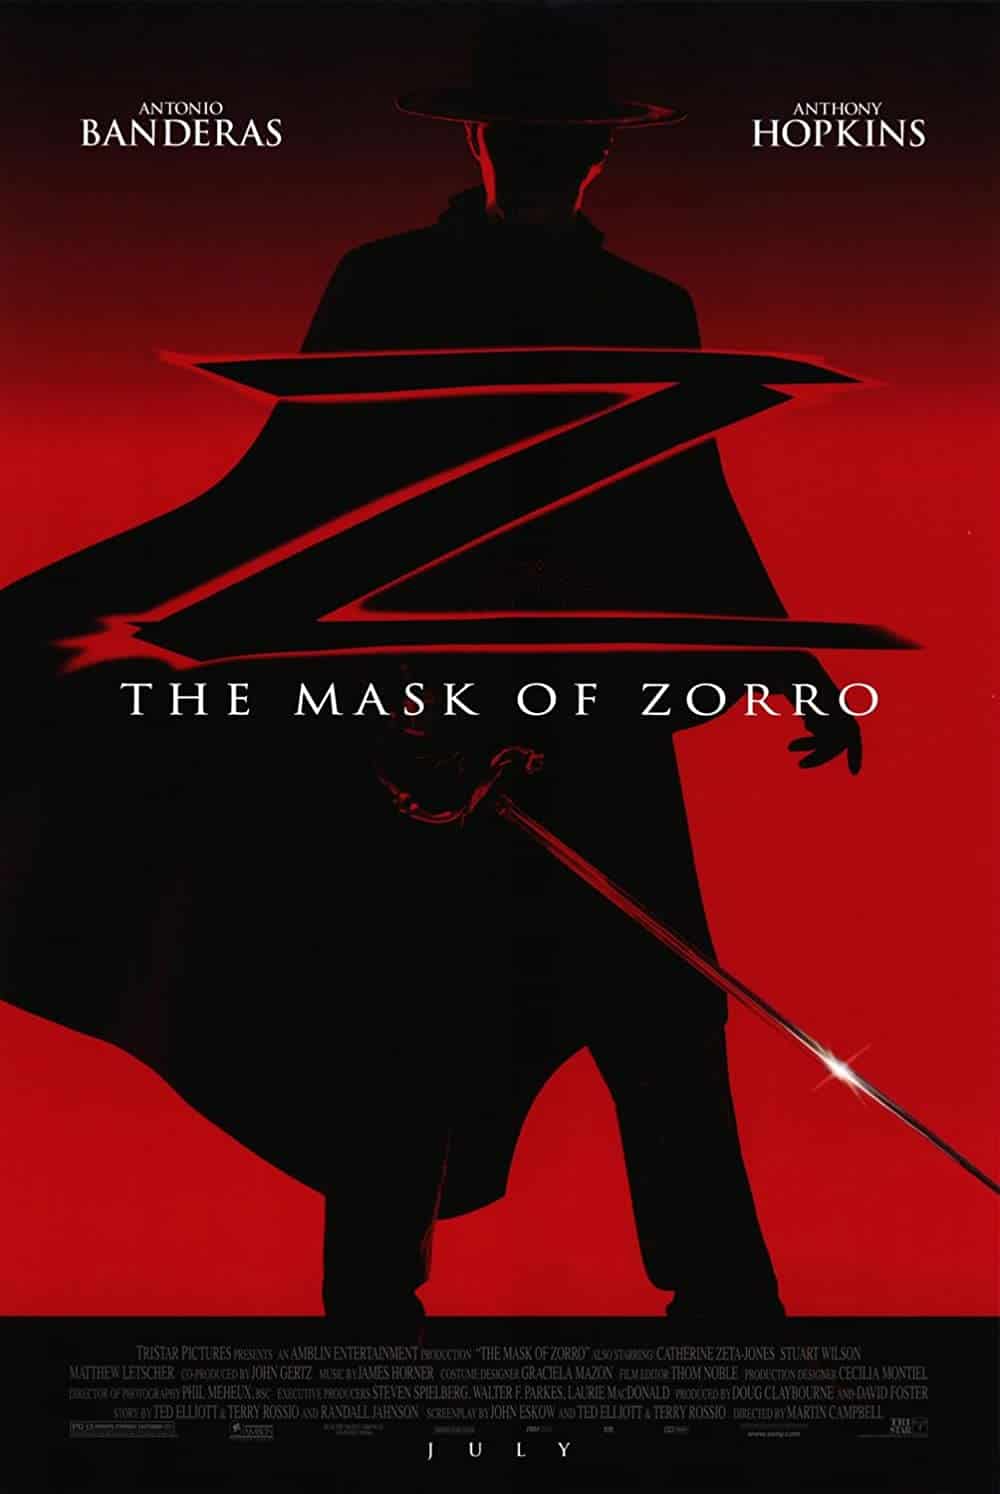 The Mask of Zorro (1998) 13 Best Action Romance Movies